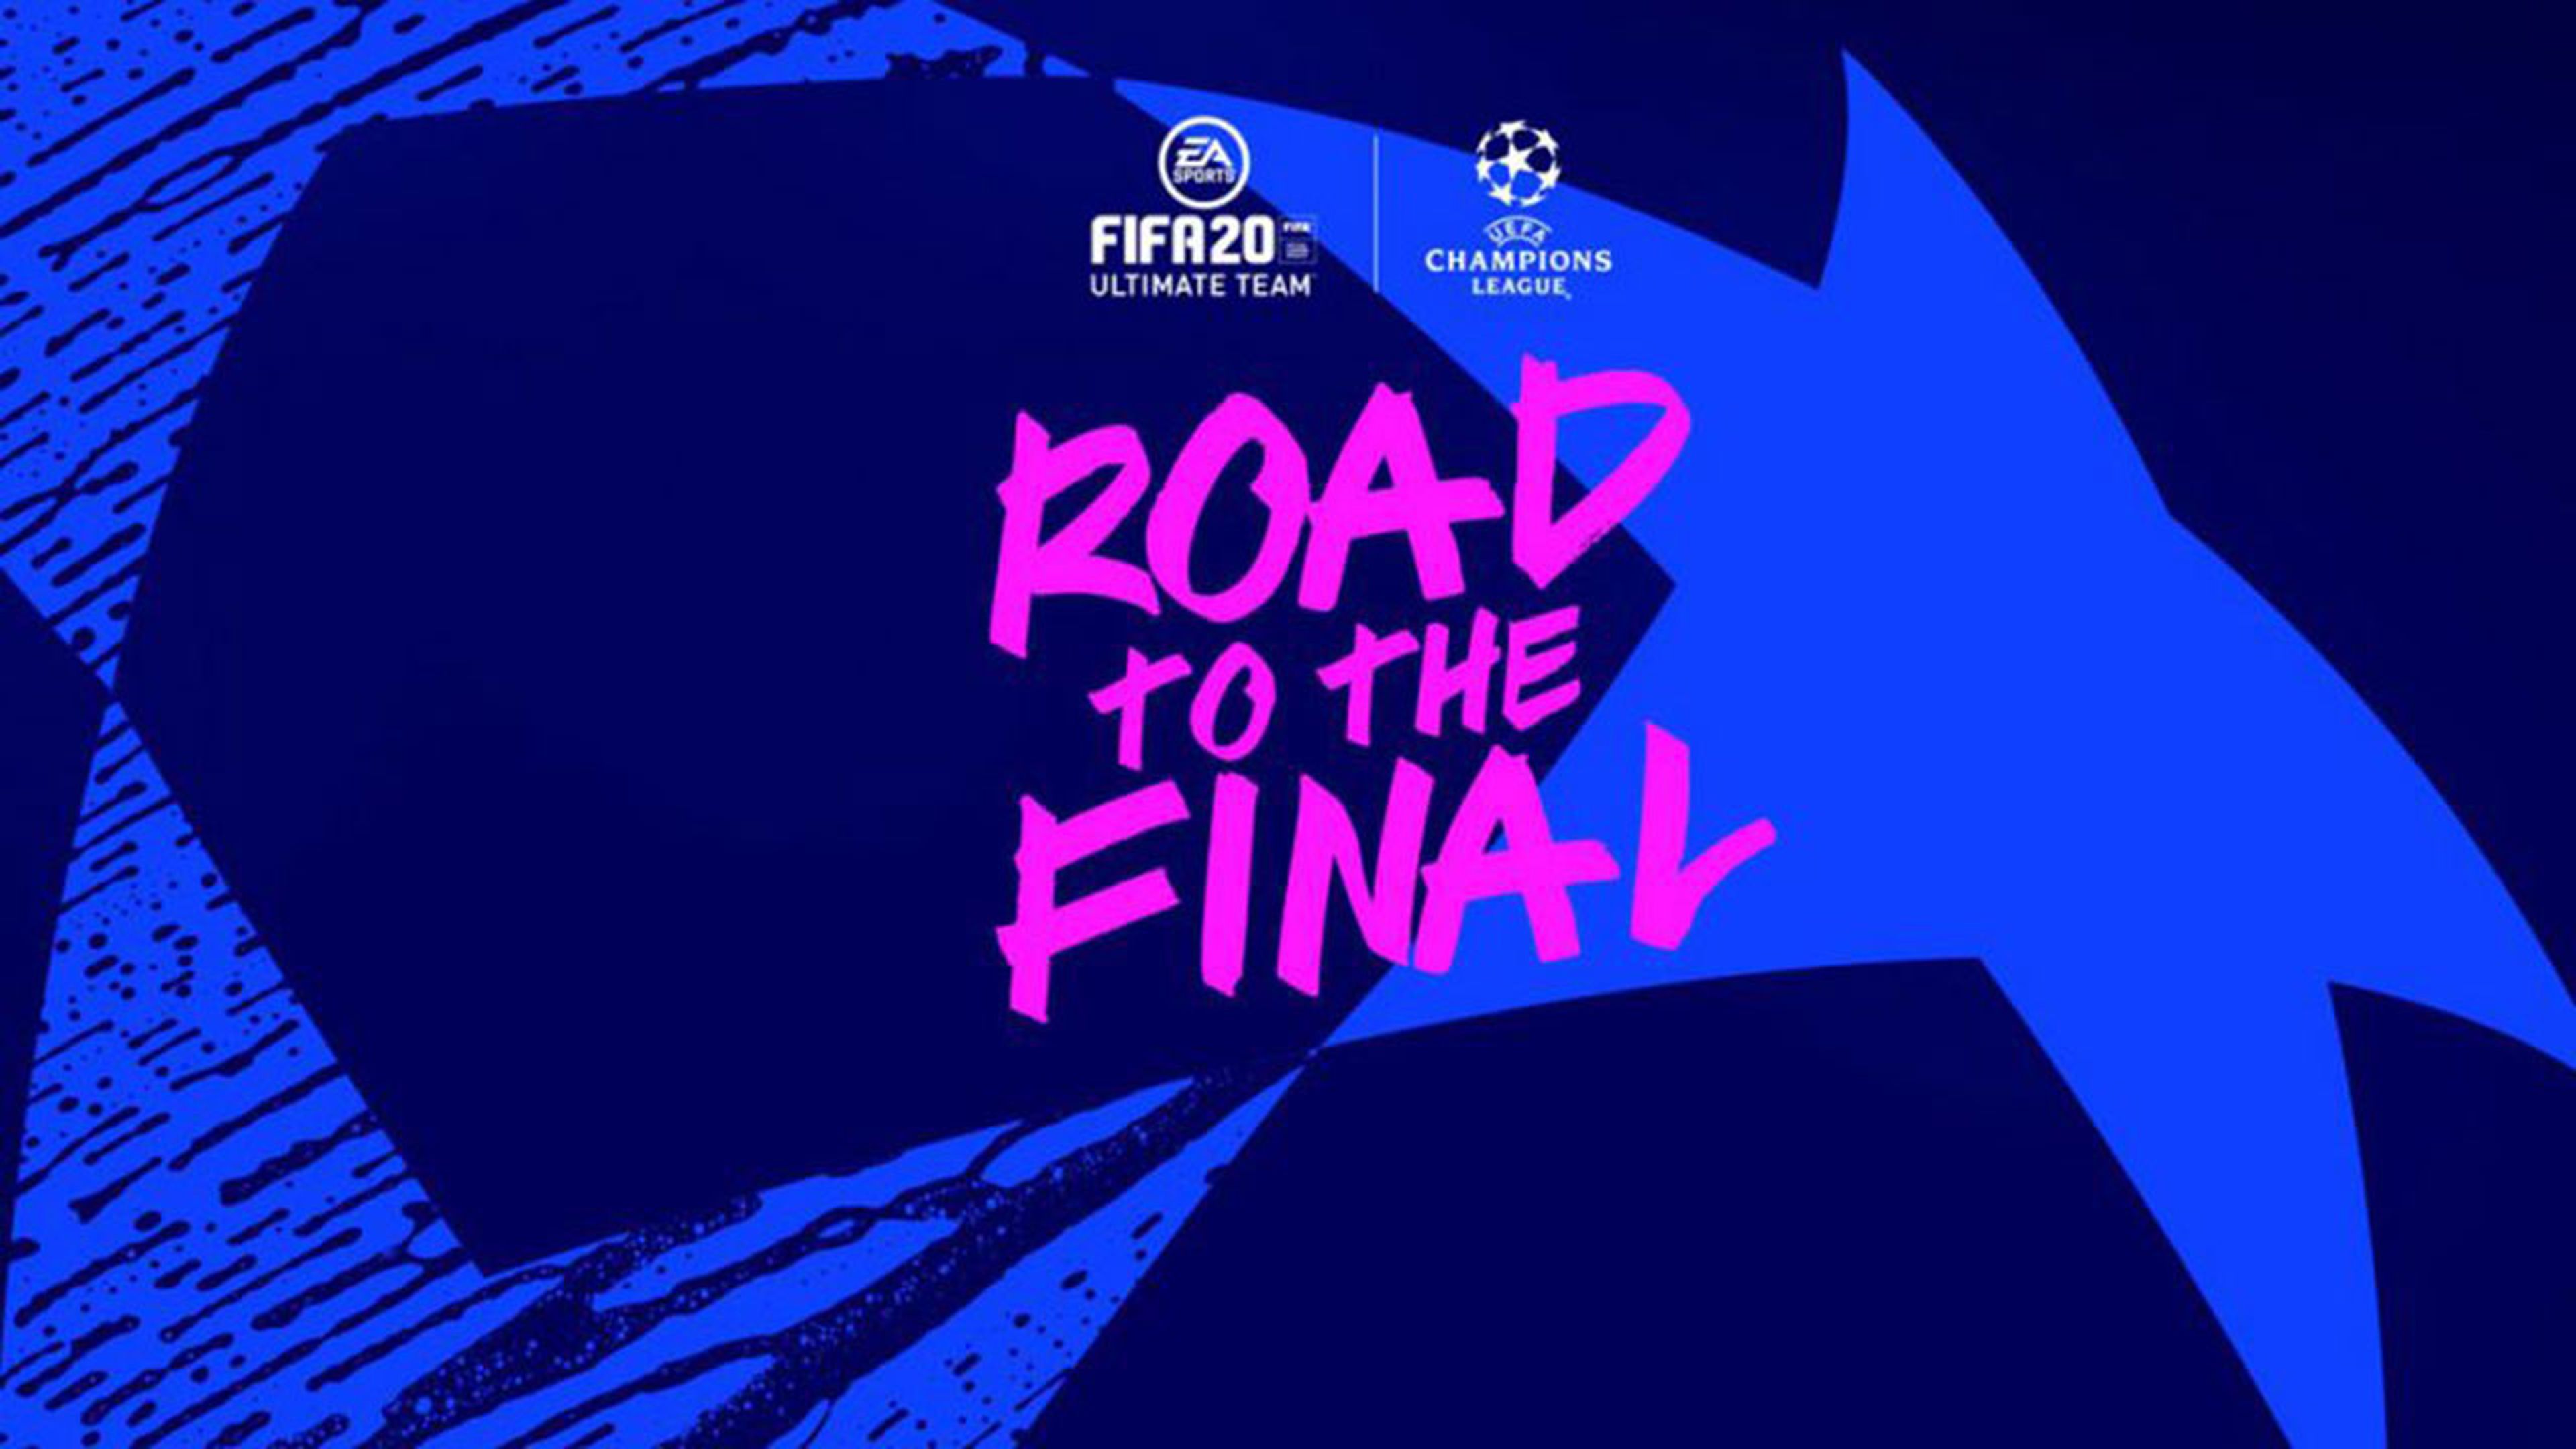 Road to the Final FIFA 20